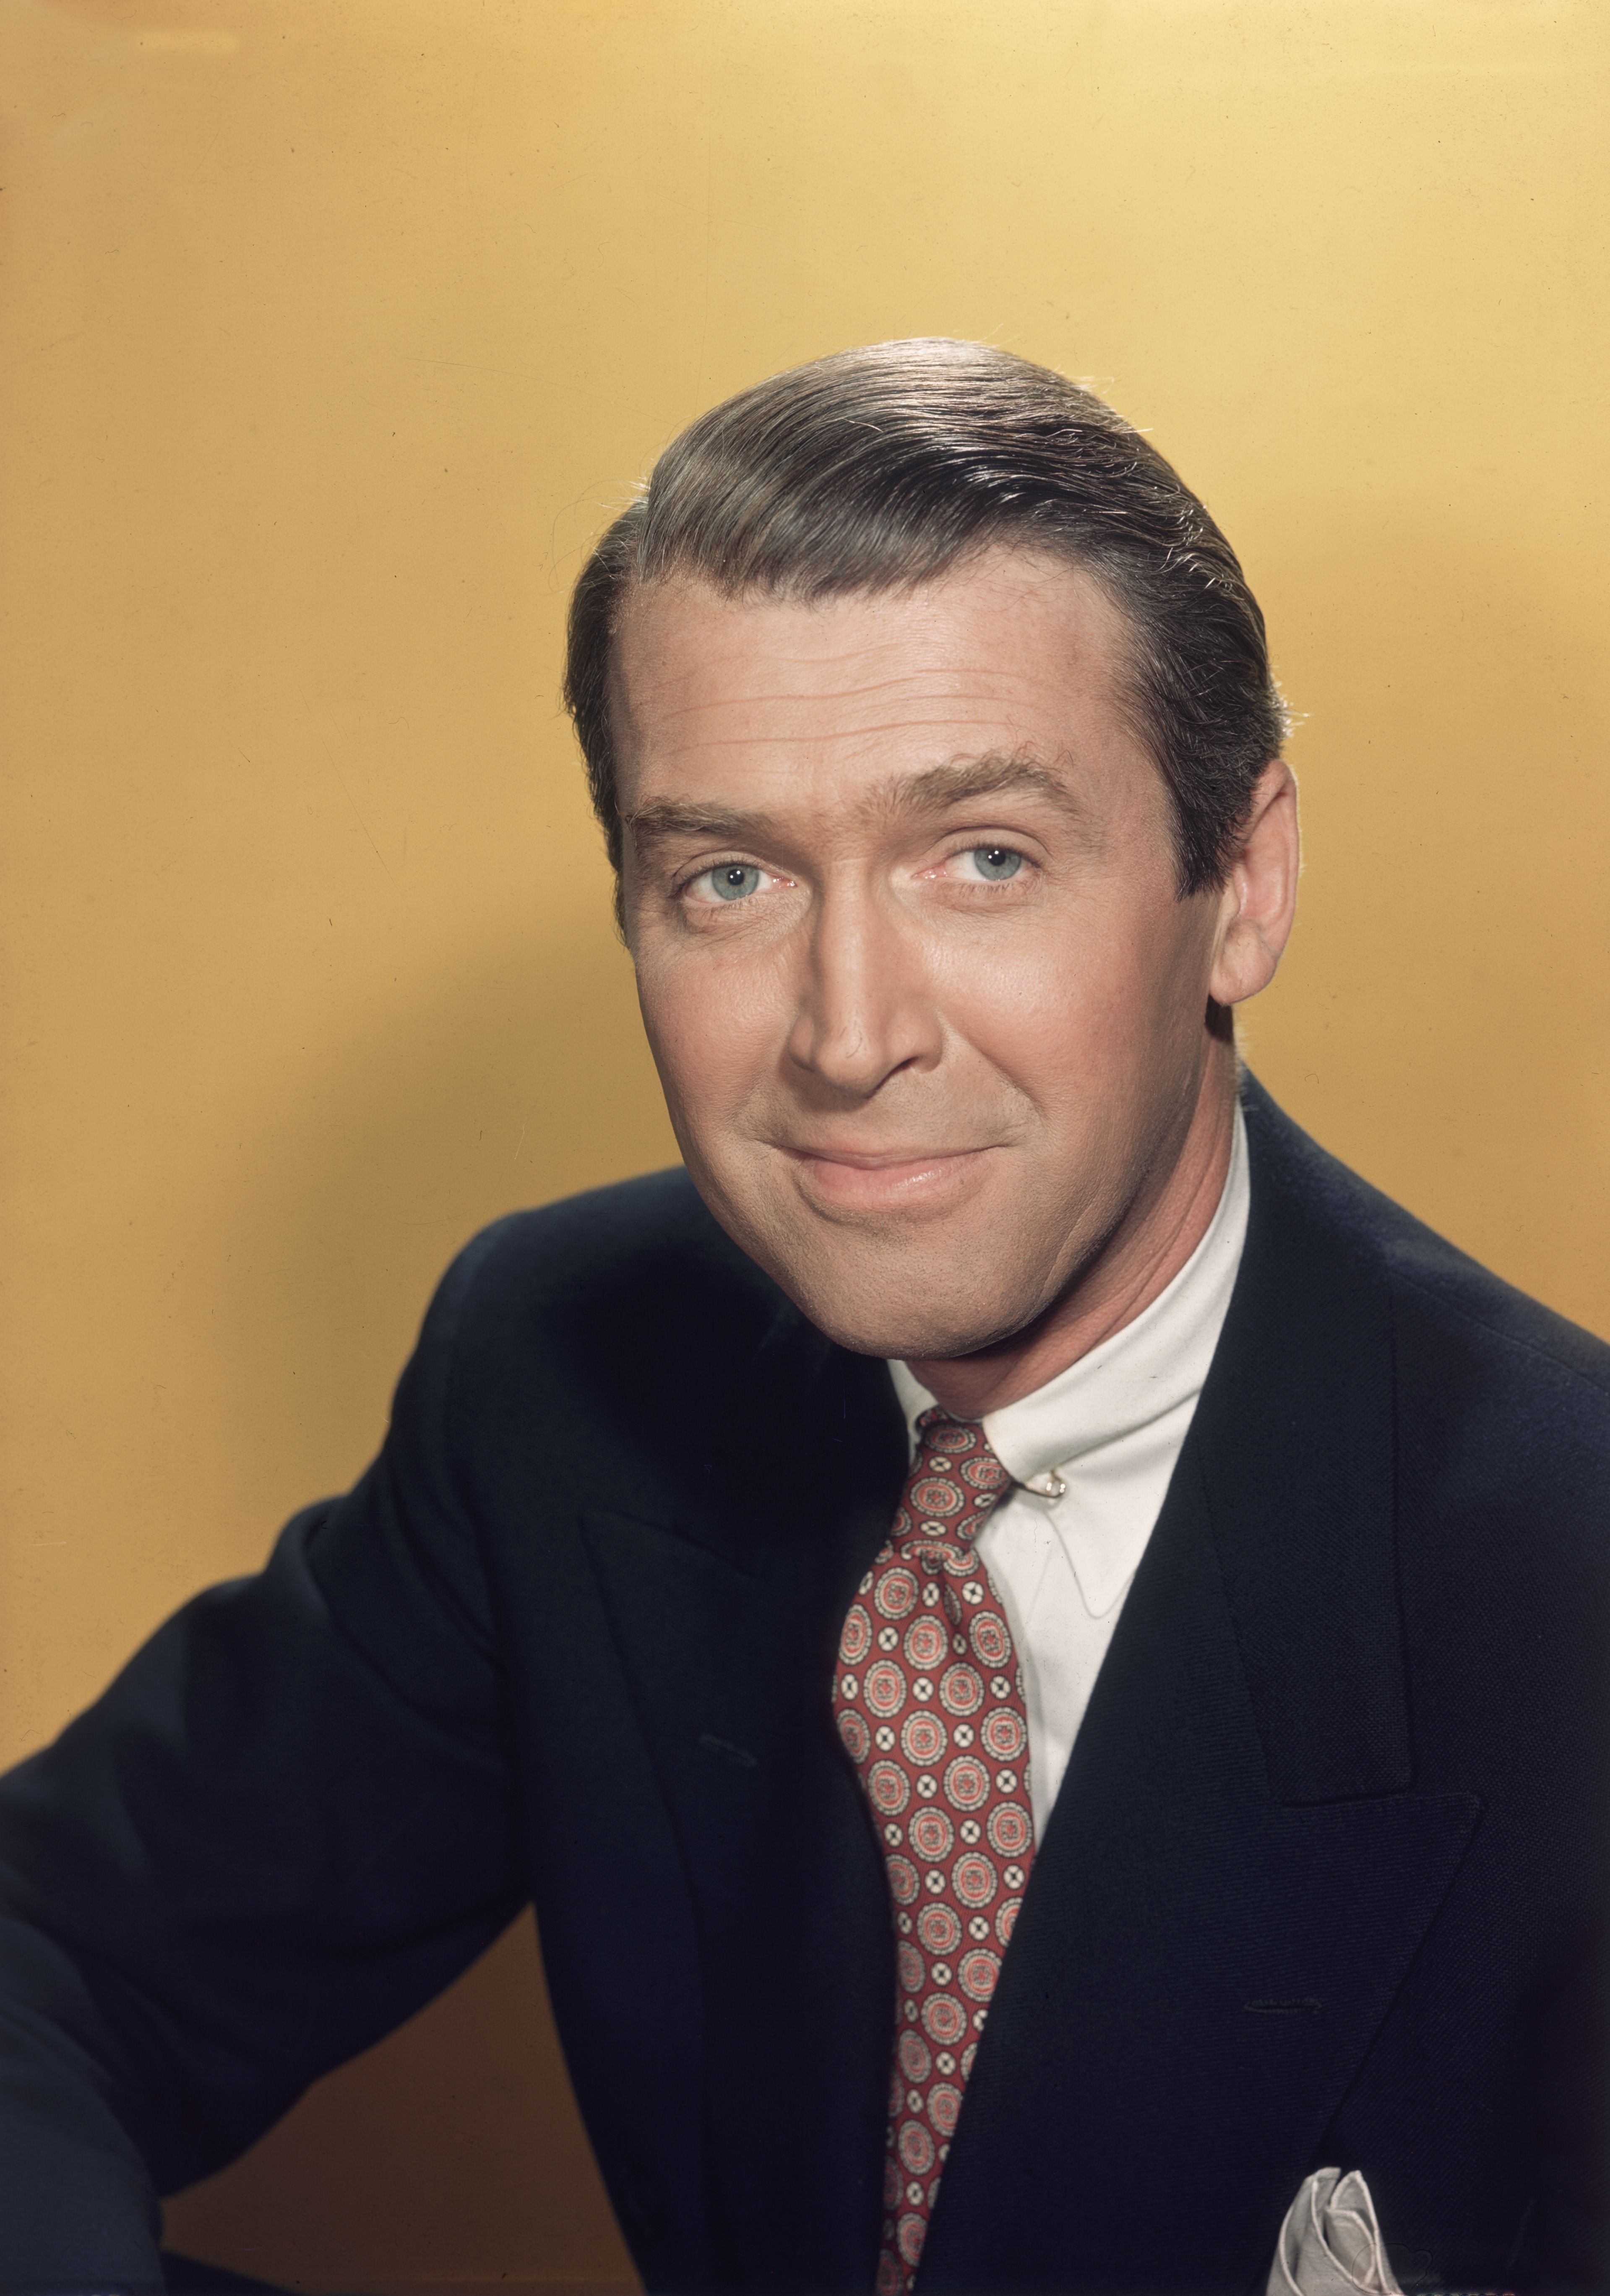 James Stewart posing for a photo, circa 1955. | Source: Hulton Archive/Getty Images